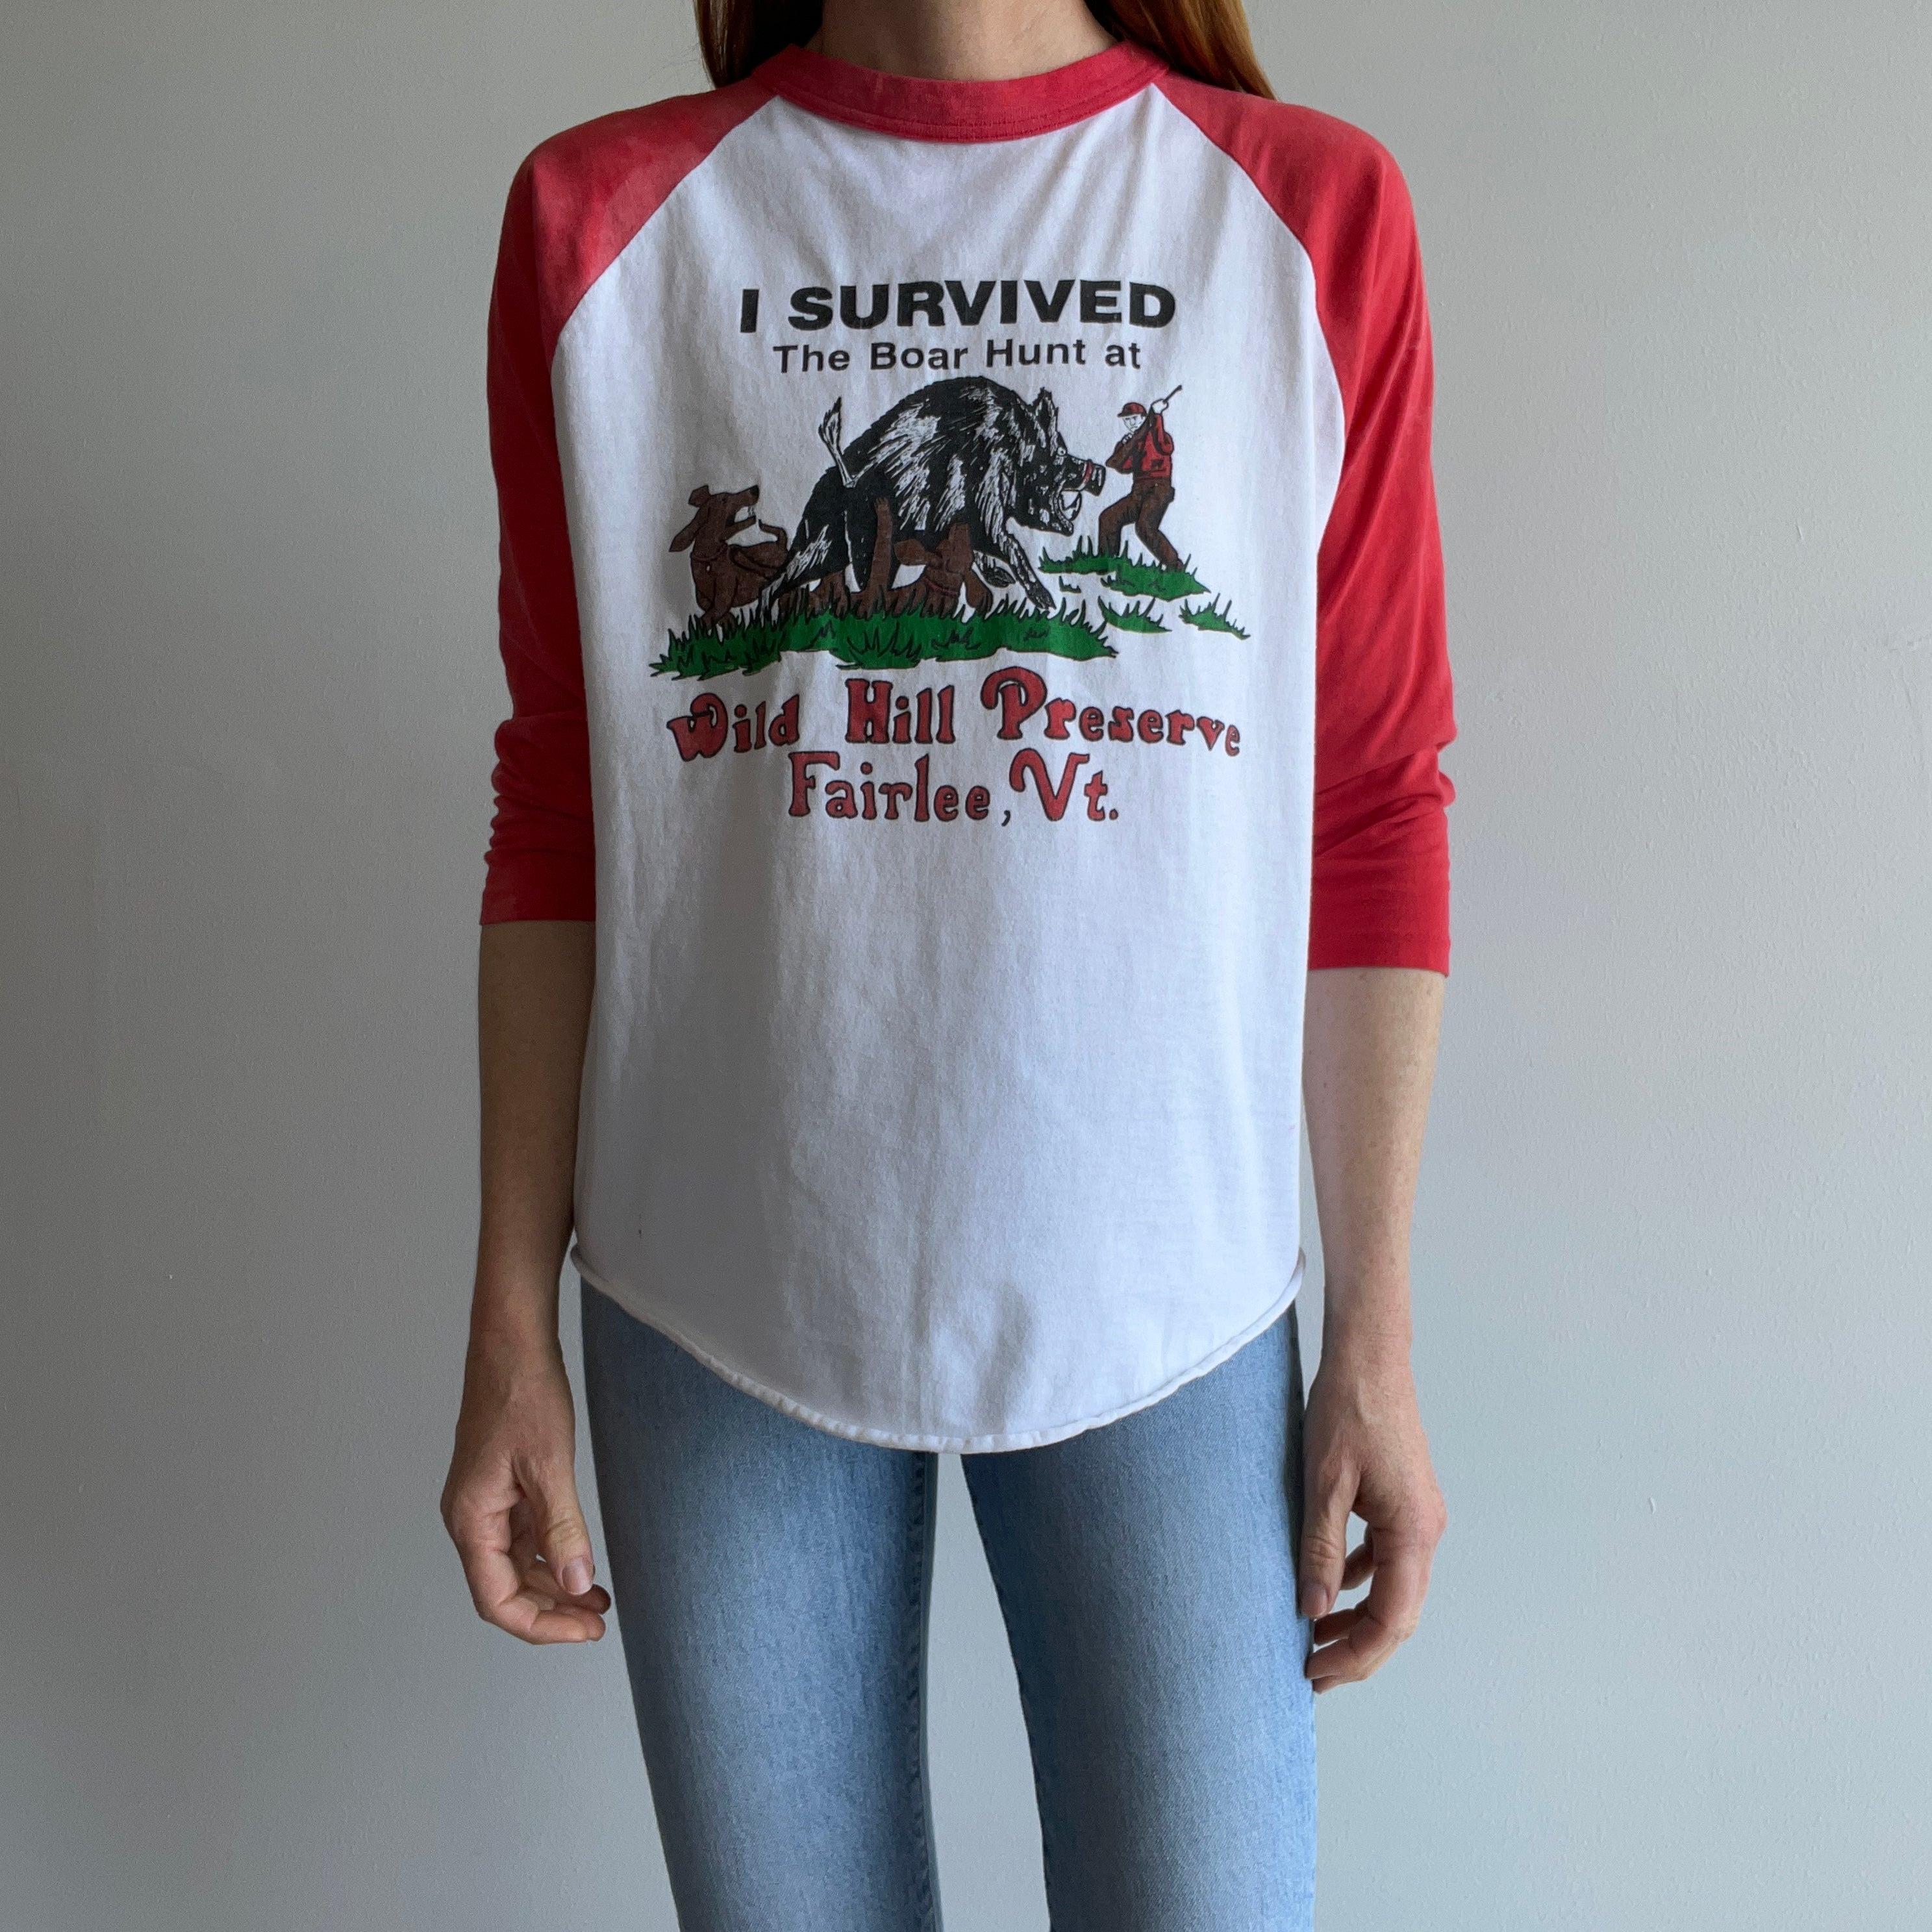 1980s I survived The Boar Hunt at Wild Hill Preserve - Fairlee, Vermont - Baseball T-Shirt